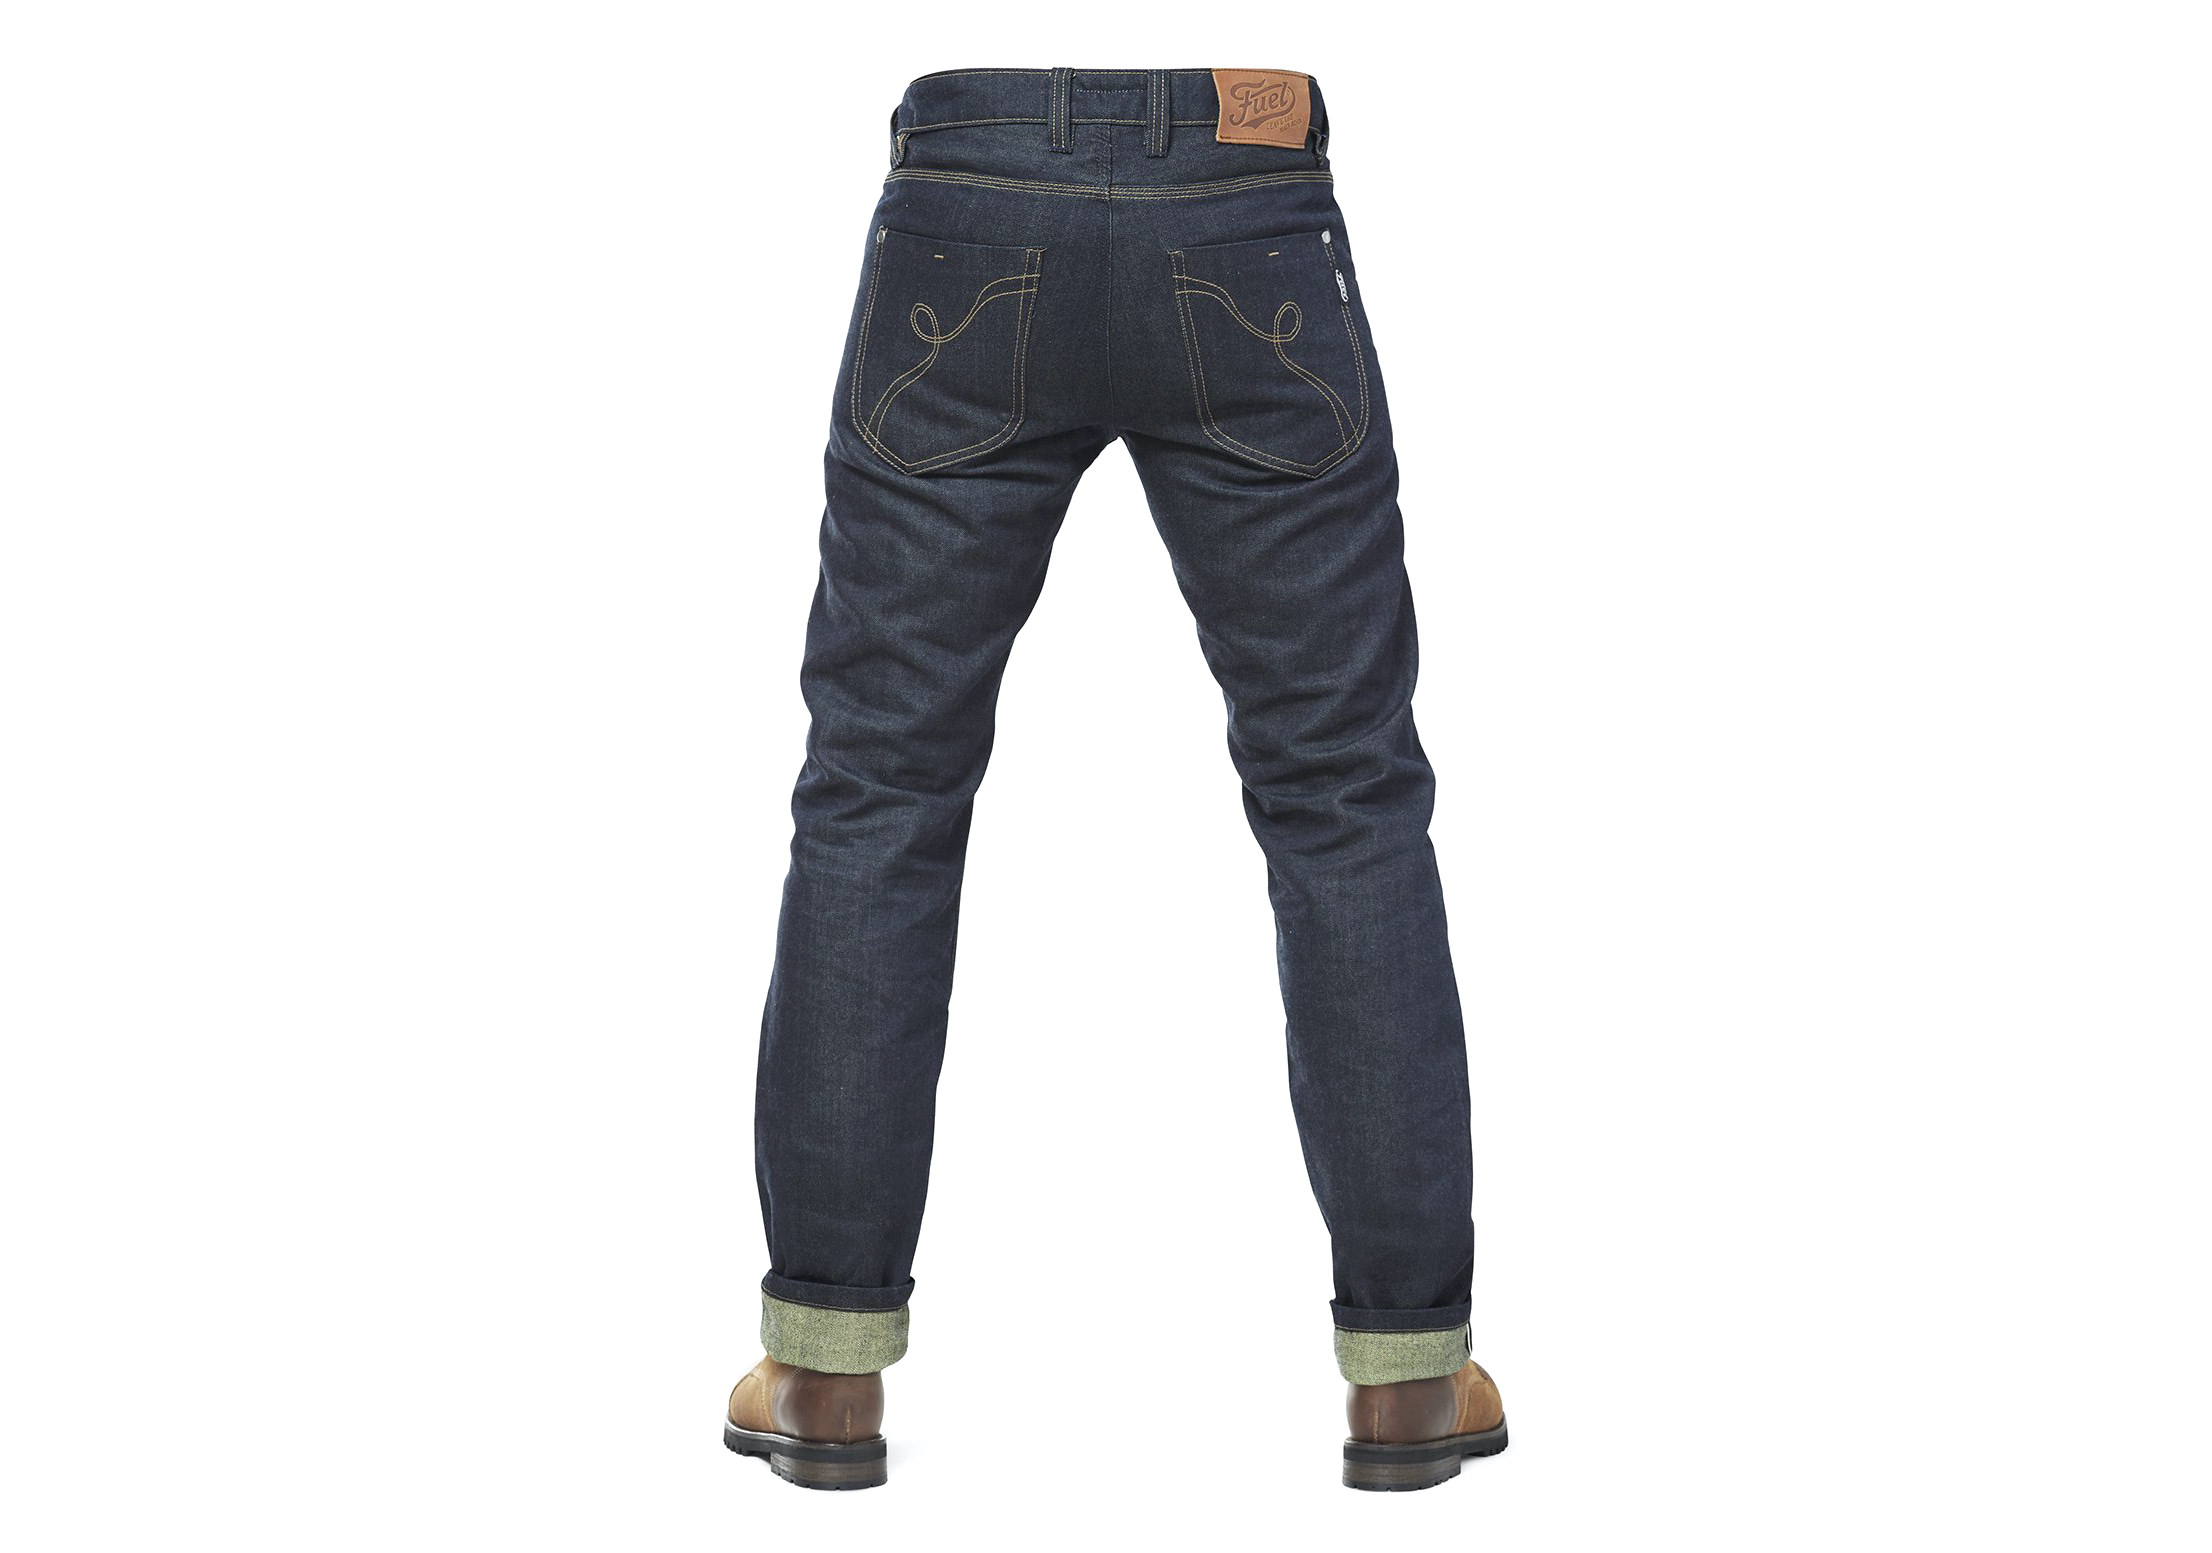 Fuel Greasy Selvedge Motorcycle Pants - Selvedge Denim Woven With ...